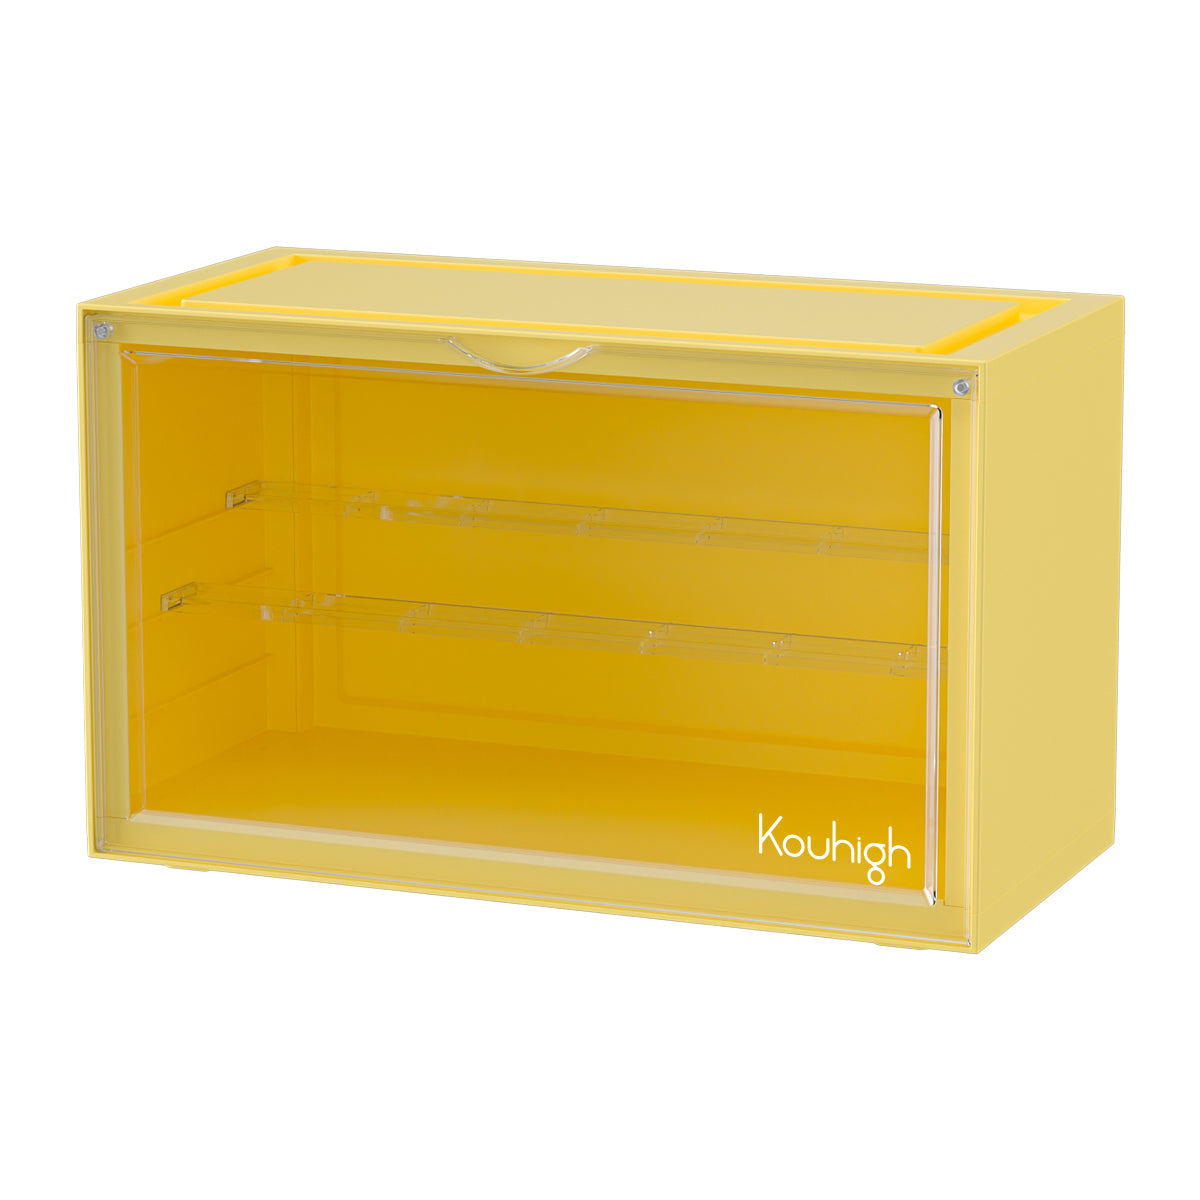 Kouhigh: Diverse Series Nine-Color Blind Box Display Case - Classic